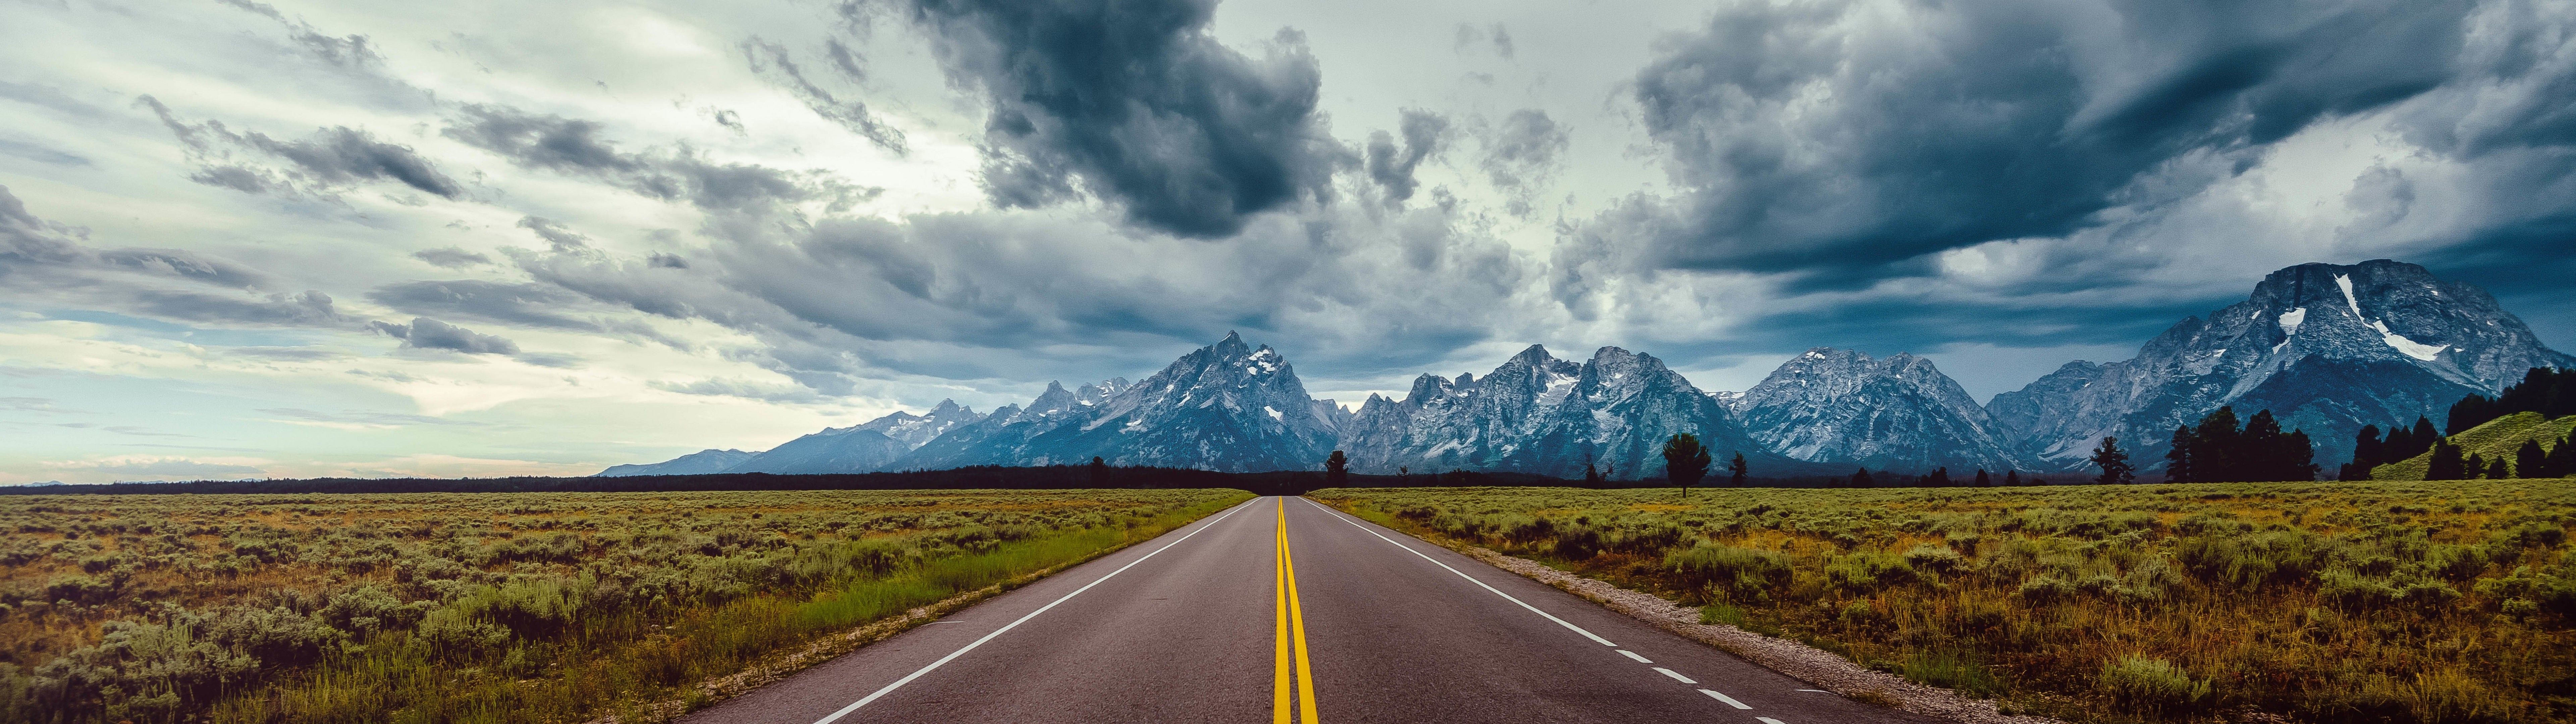 Download 7680x2160 Long Road, Mountains, Dark Clouds, Scenic Wallpaper